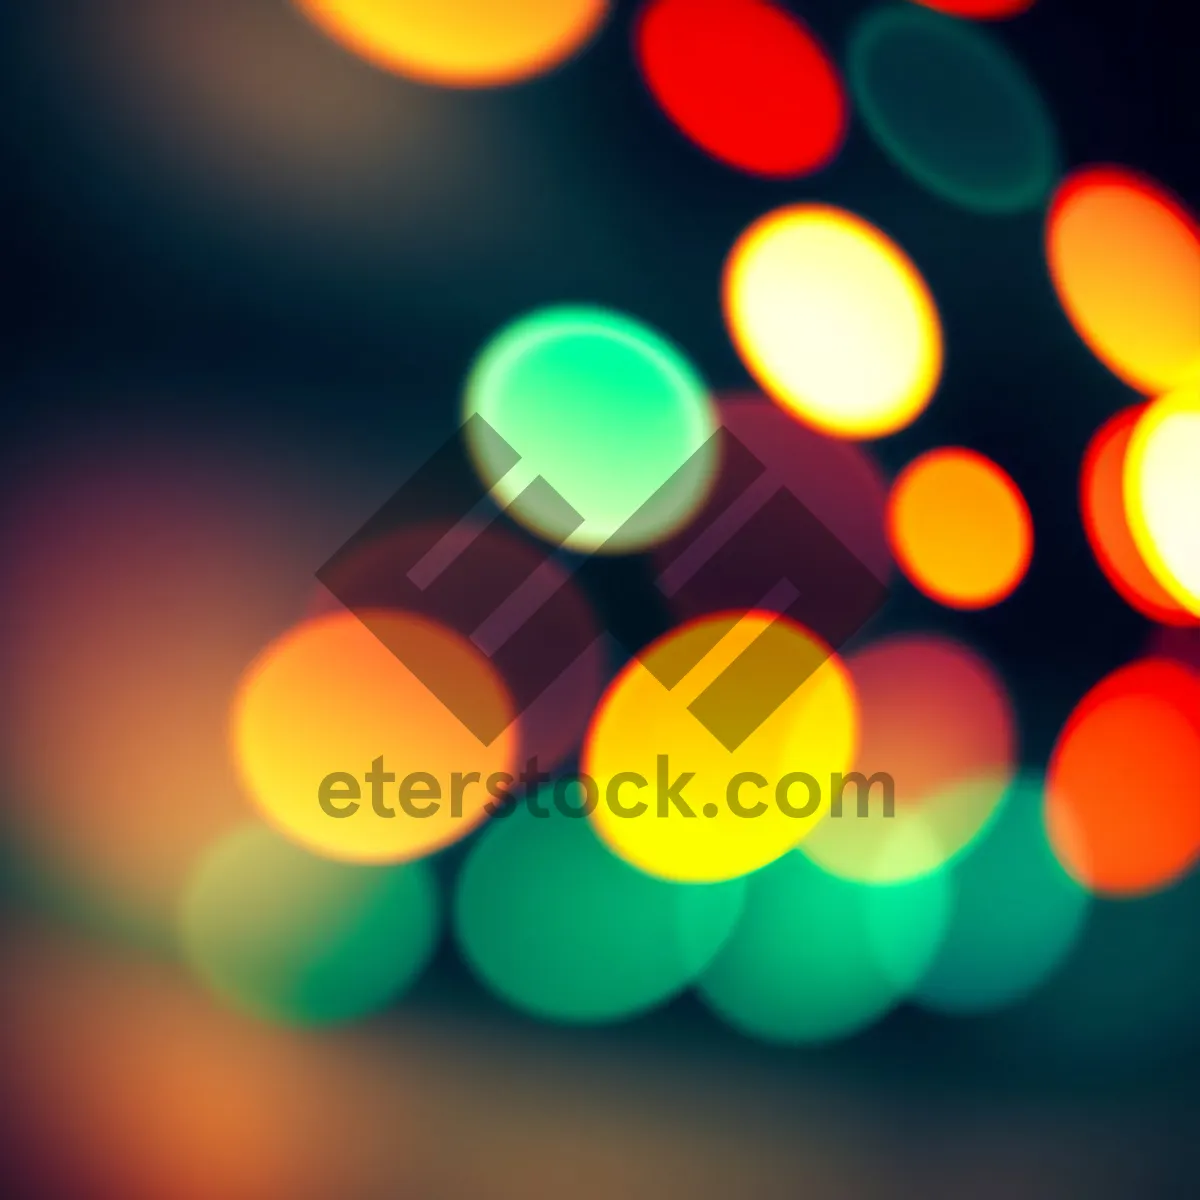 Picture of Vibrant Glow: Blurred Circle of Colorful Light